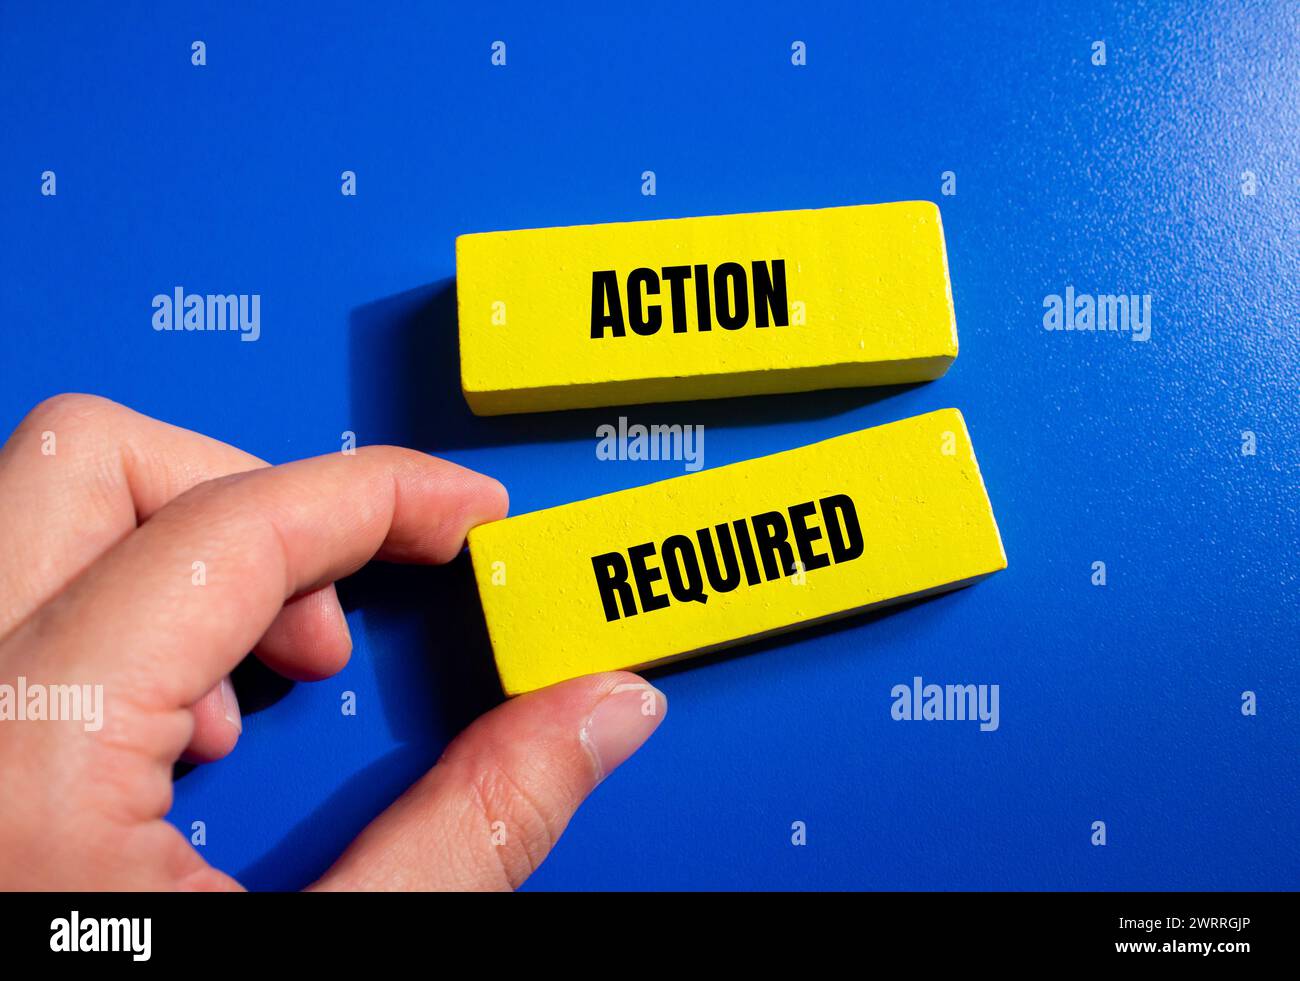 Action required words written on wooden blocks with blue background. Conceptual symbol. Copy space. Stock Photo